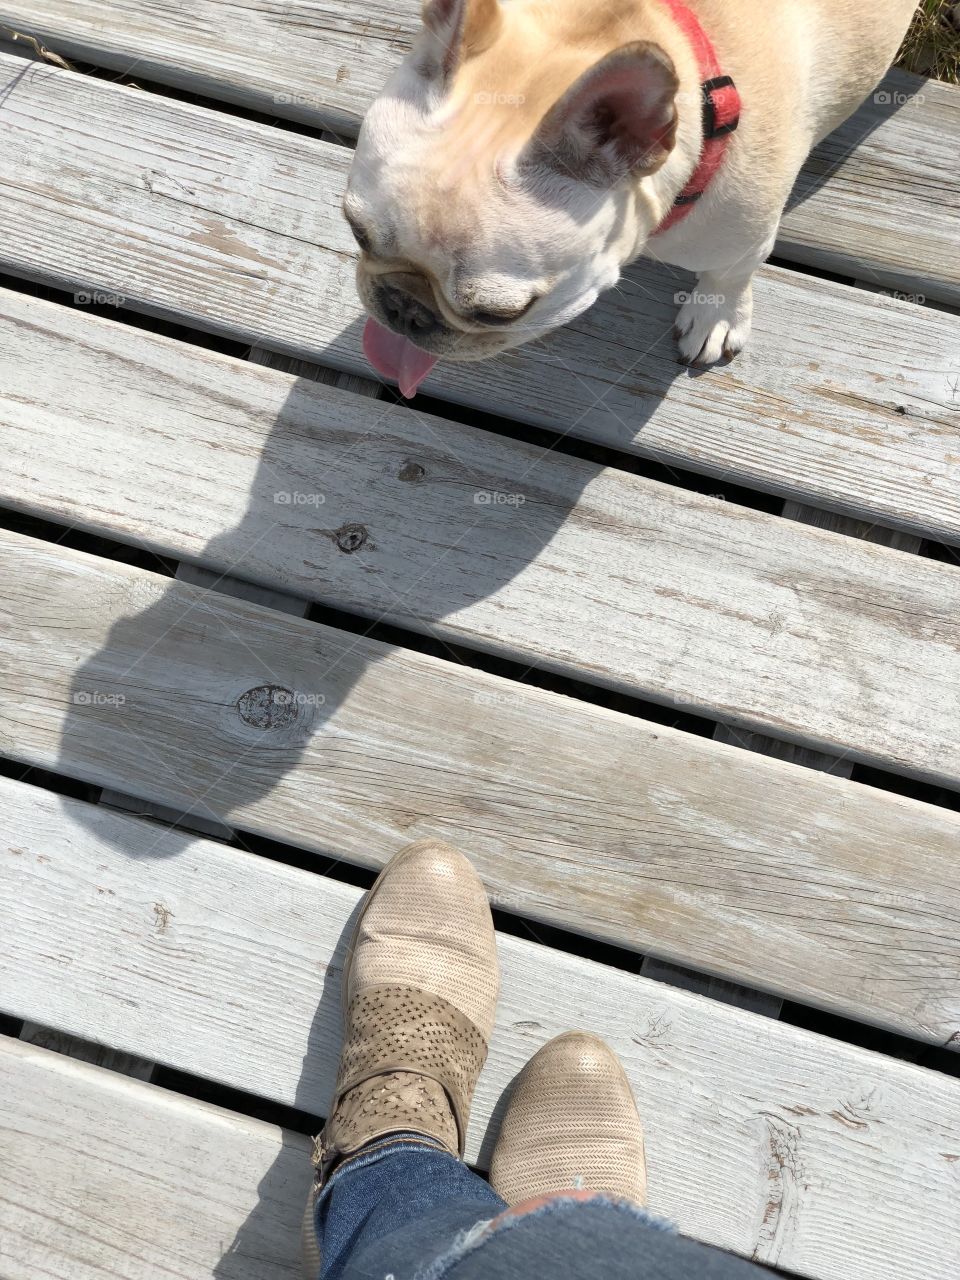 Standing on a Wooden Dock Looking Down at French Bulldog. Boots and Bulldog on Lakeside Dock.